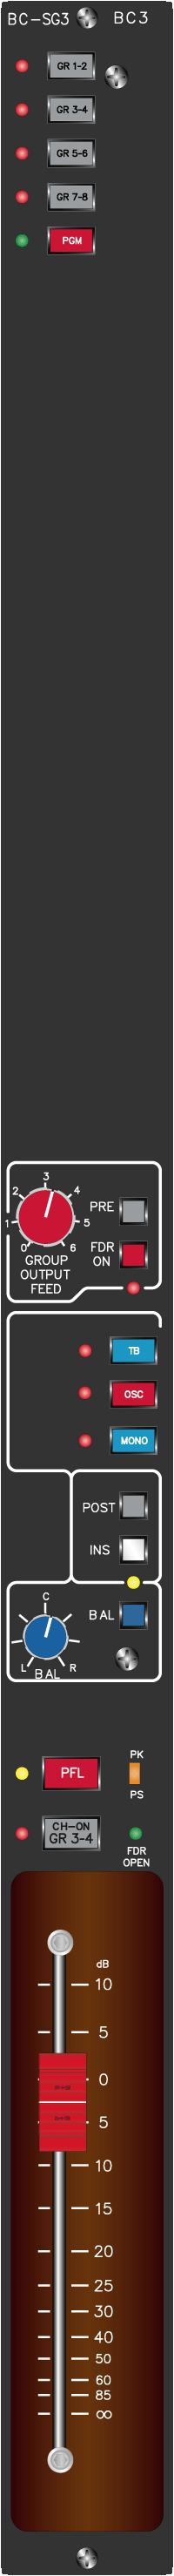 Stereo Group Module SG3 - Top Plate View